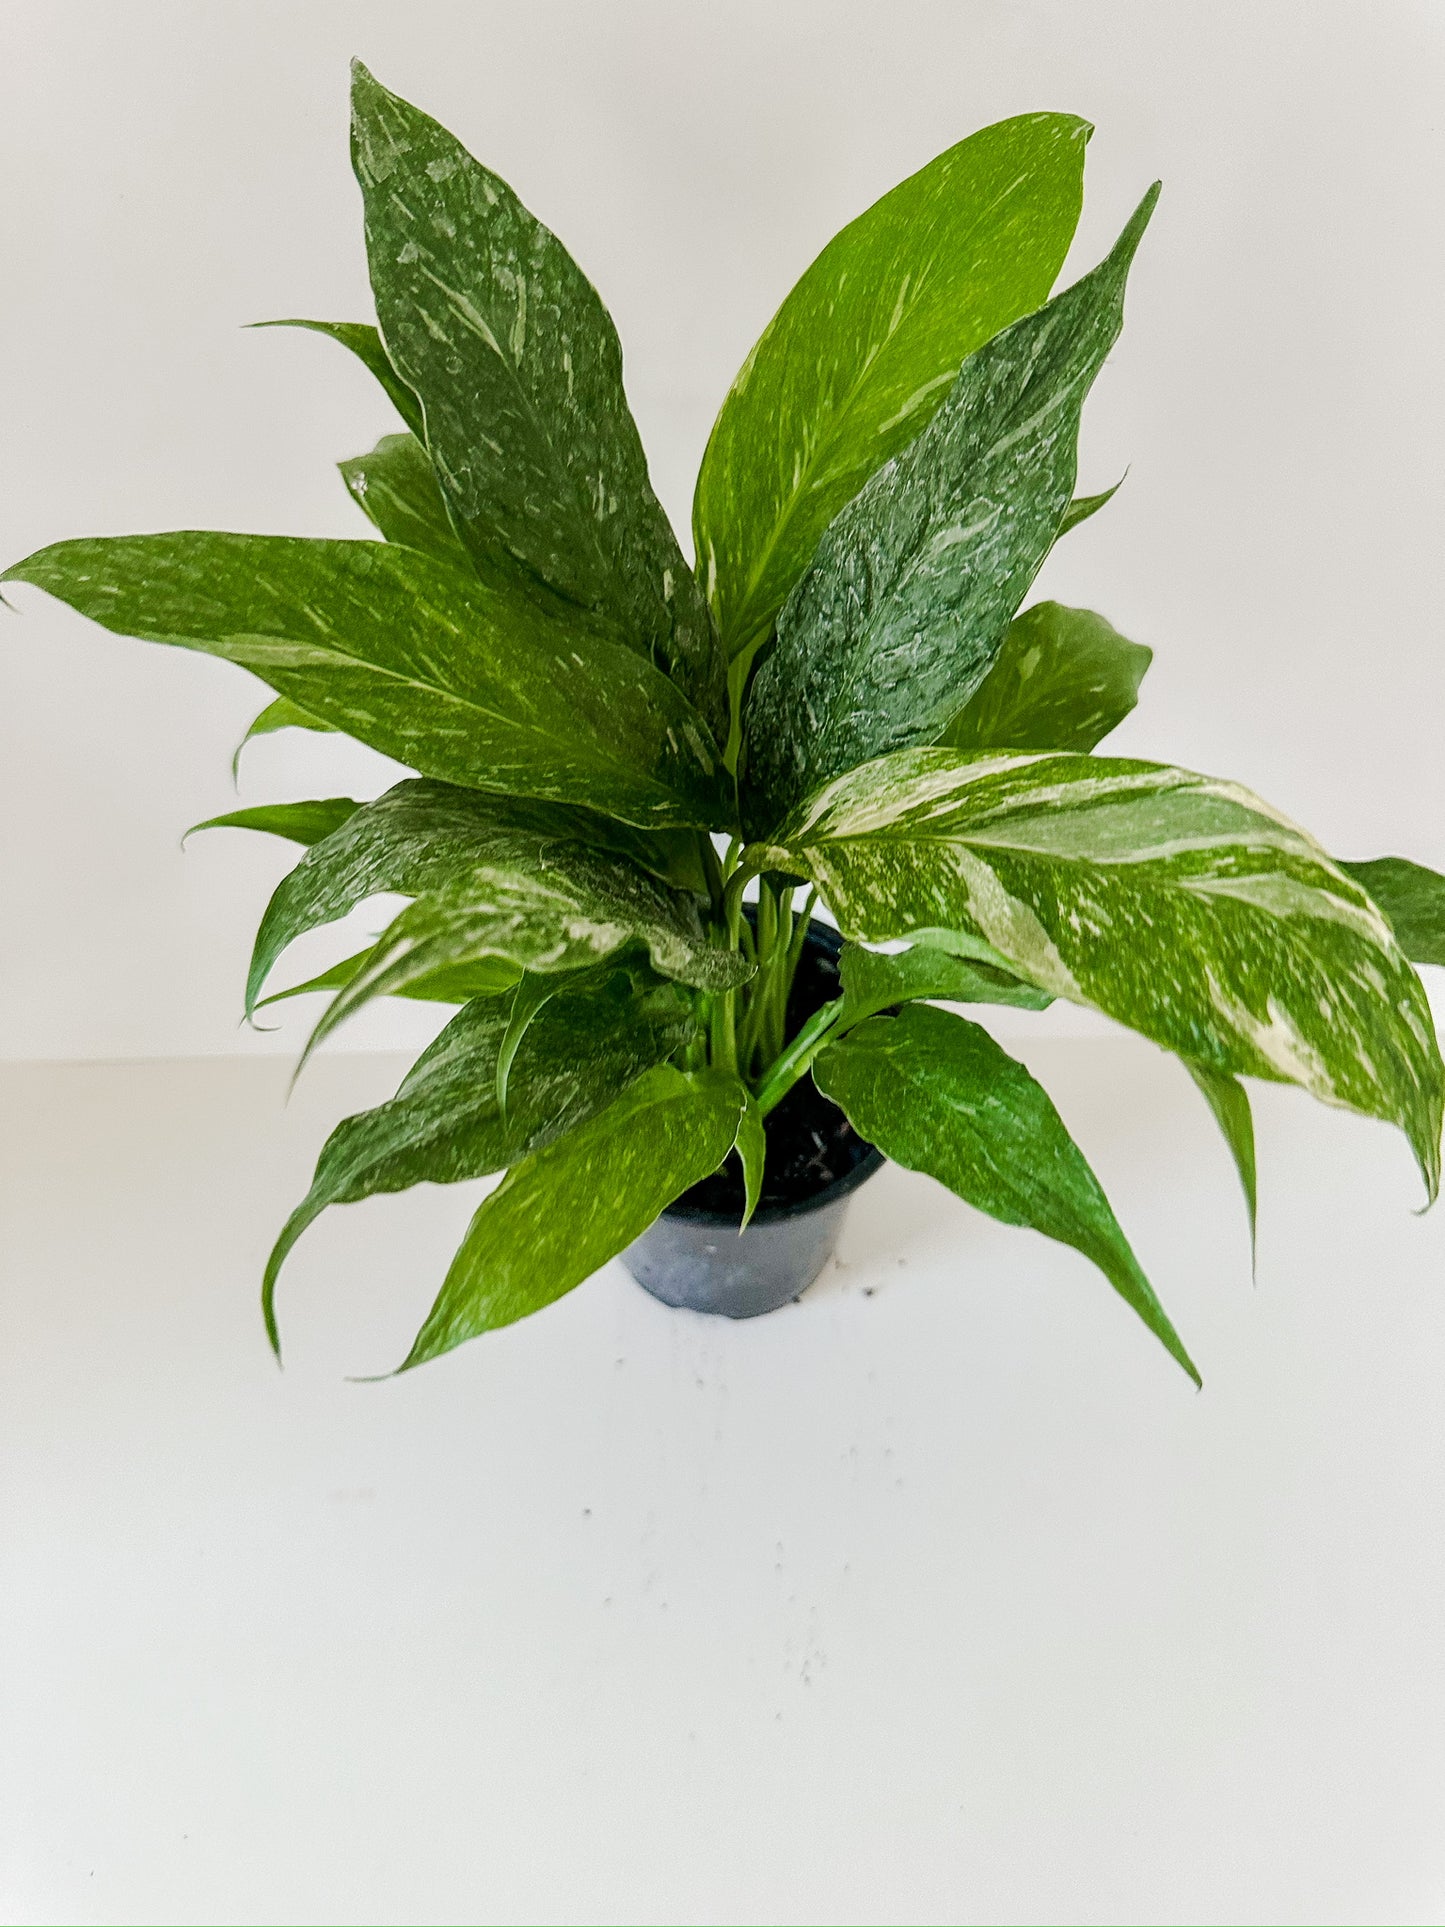 Spathiphyllum 'Domino' Variegated Peace Lilly- Stunning White Cream Variegated Leaves With Vibrant White Flowers- Tropical Houseplant- (4 Inch or 6 Inch Nursery Pot)